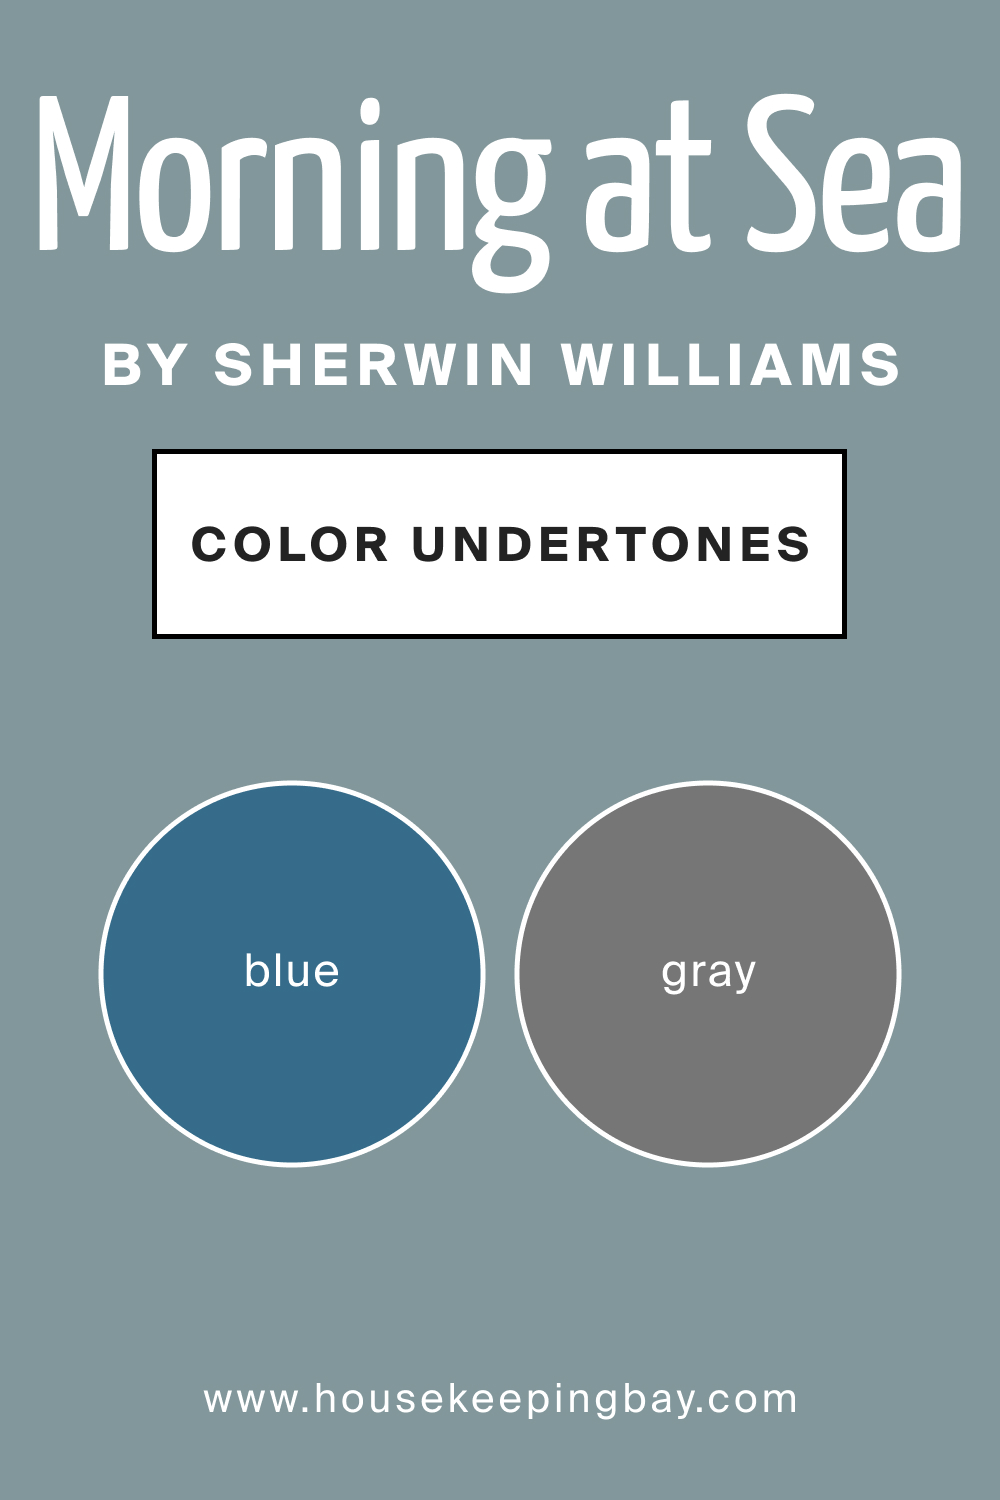 SW 9634 Morning at Sea by Sherwin Williams Color Undertone